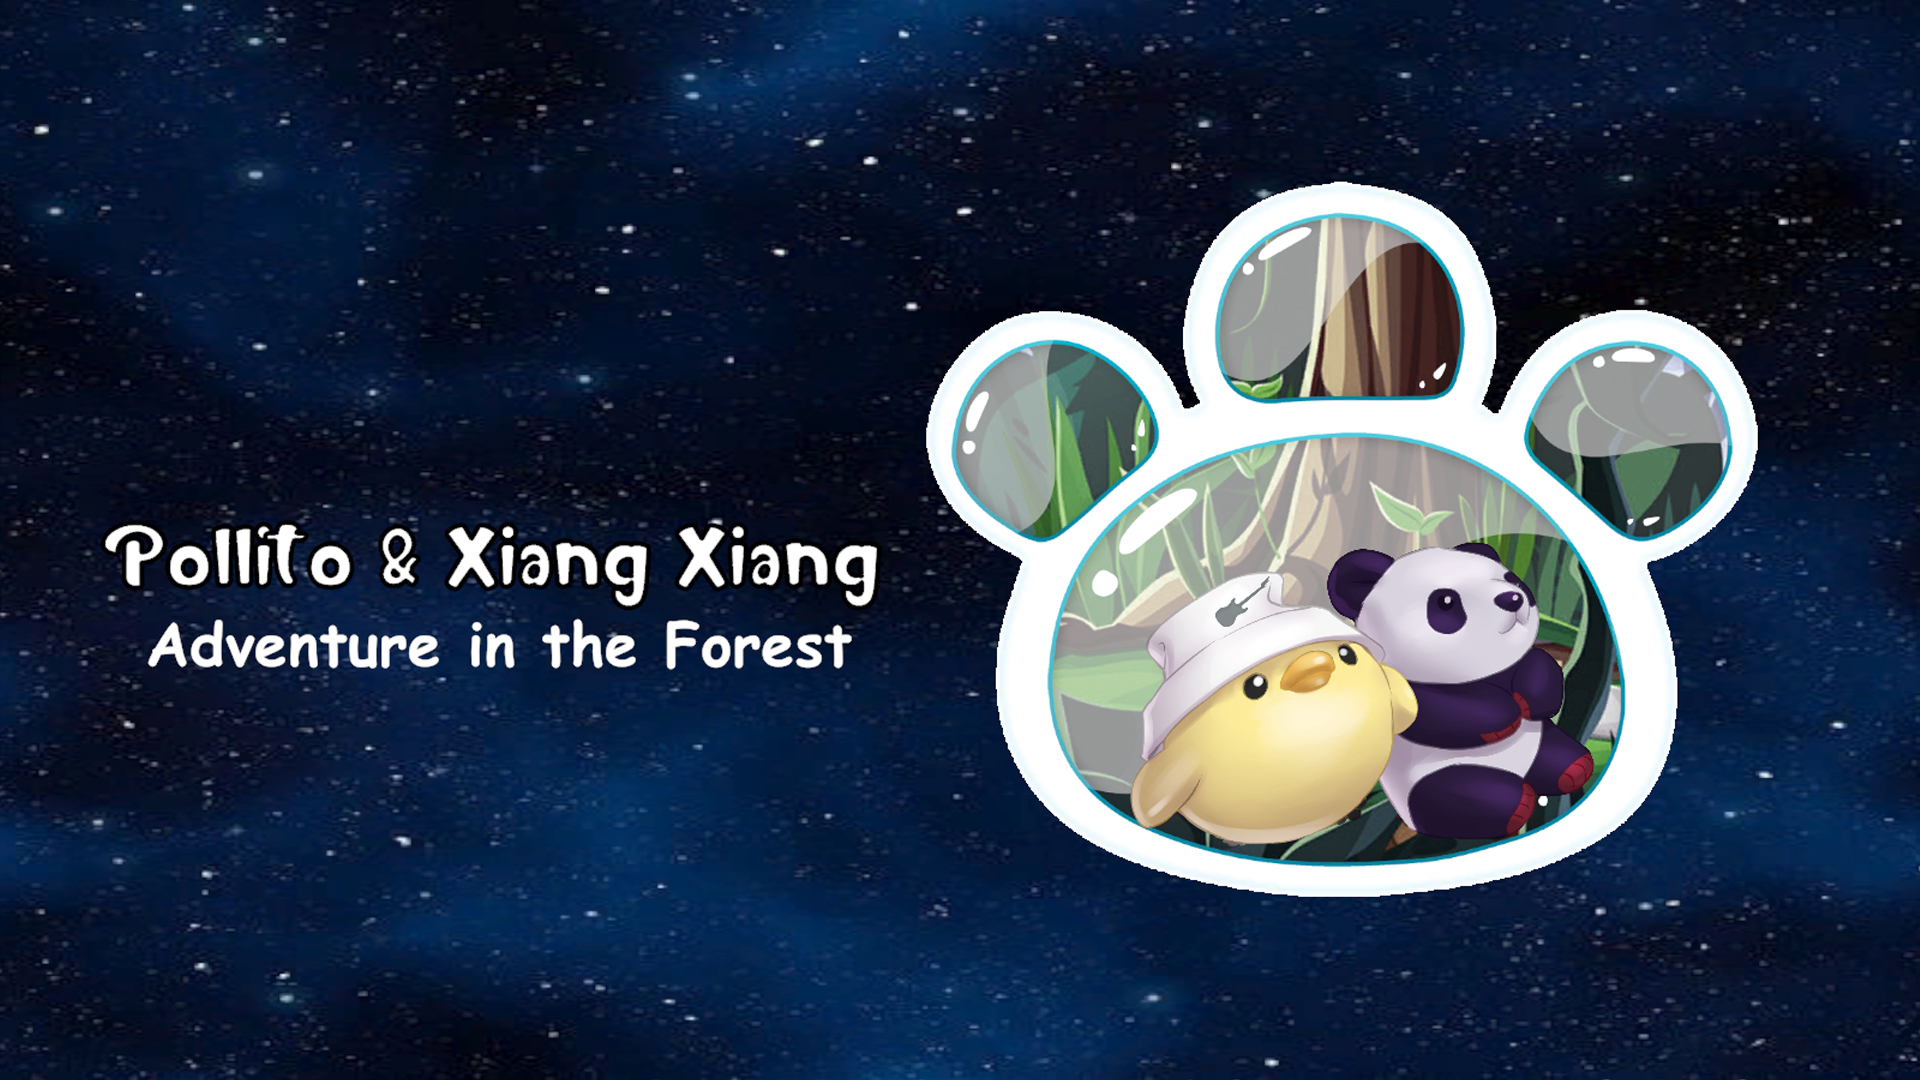 Pollito & Xiang Xiang: Adventure in the forest